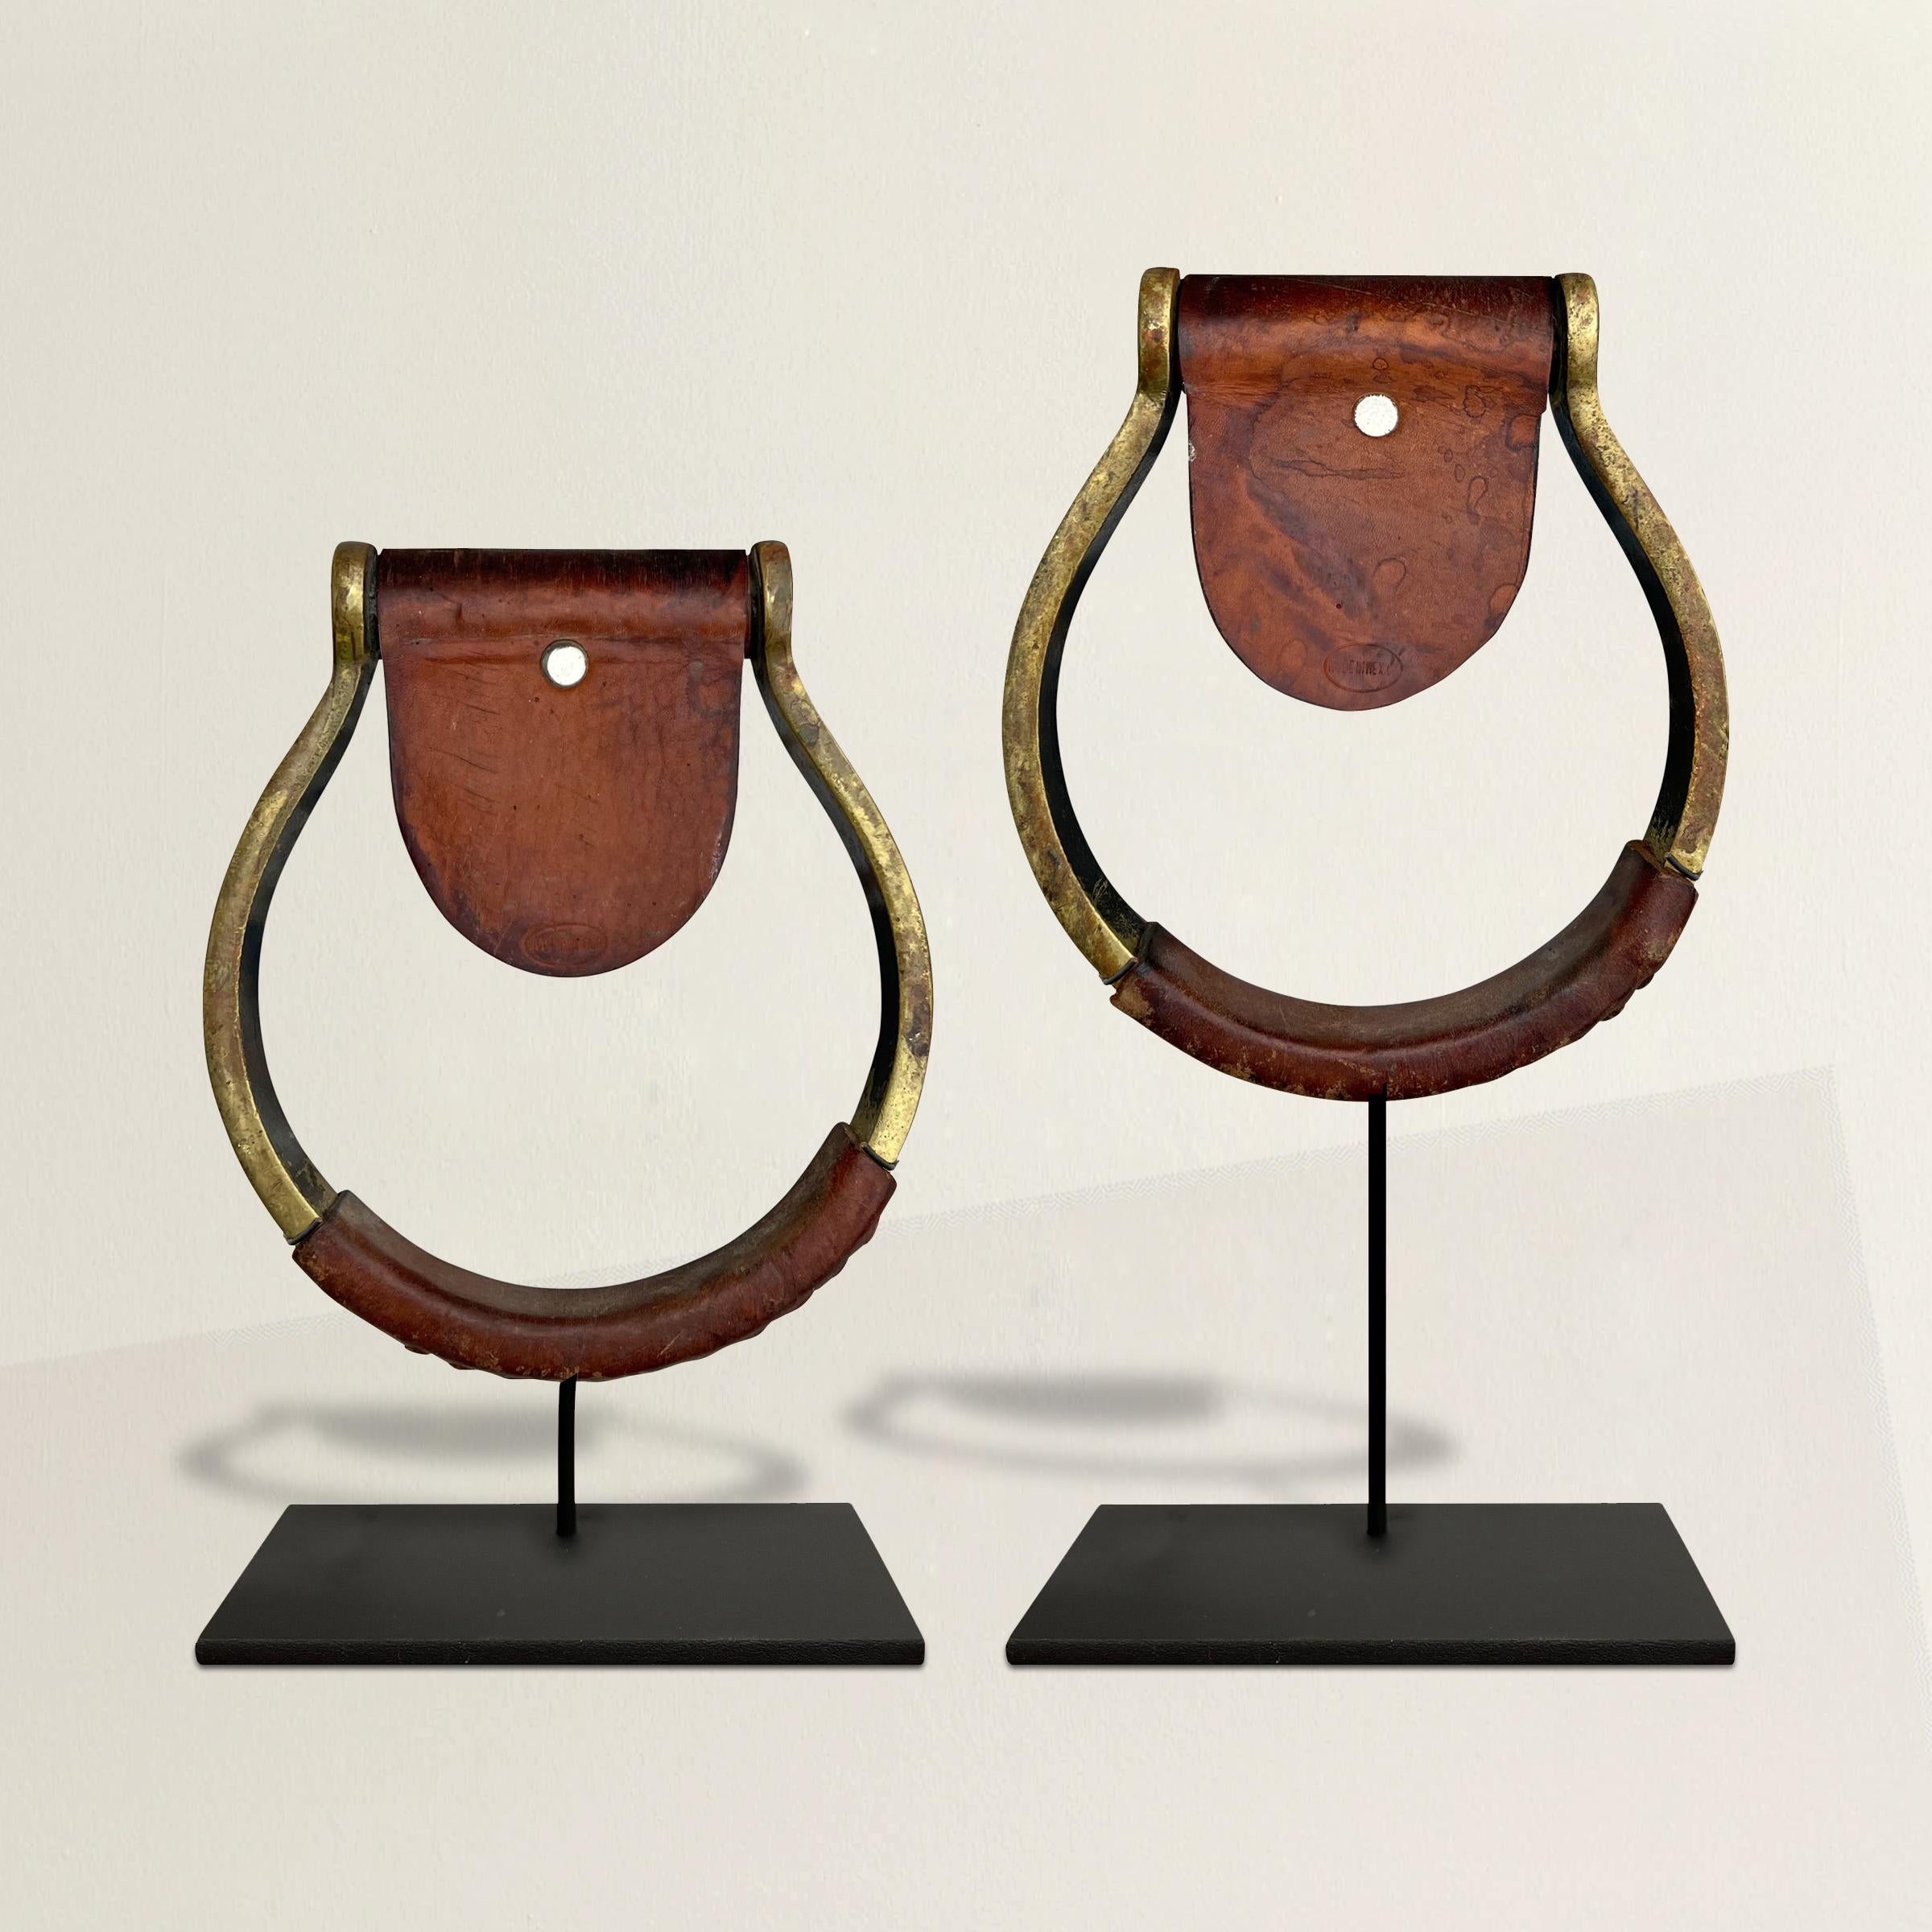 These vintage Mexican hand-stitched leather wrapped brass stirrups are an exquisite blend of craftsmanship and equestrian heritage. Each stirrup has been meticulously crafted, showcasing the skill and artistry of Mexican artisans. The lustrous brass